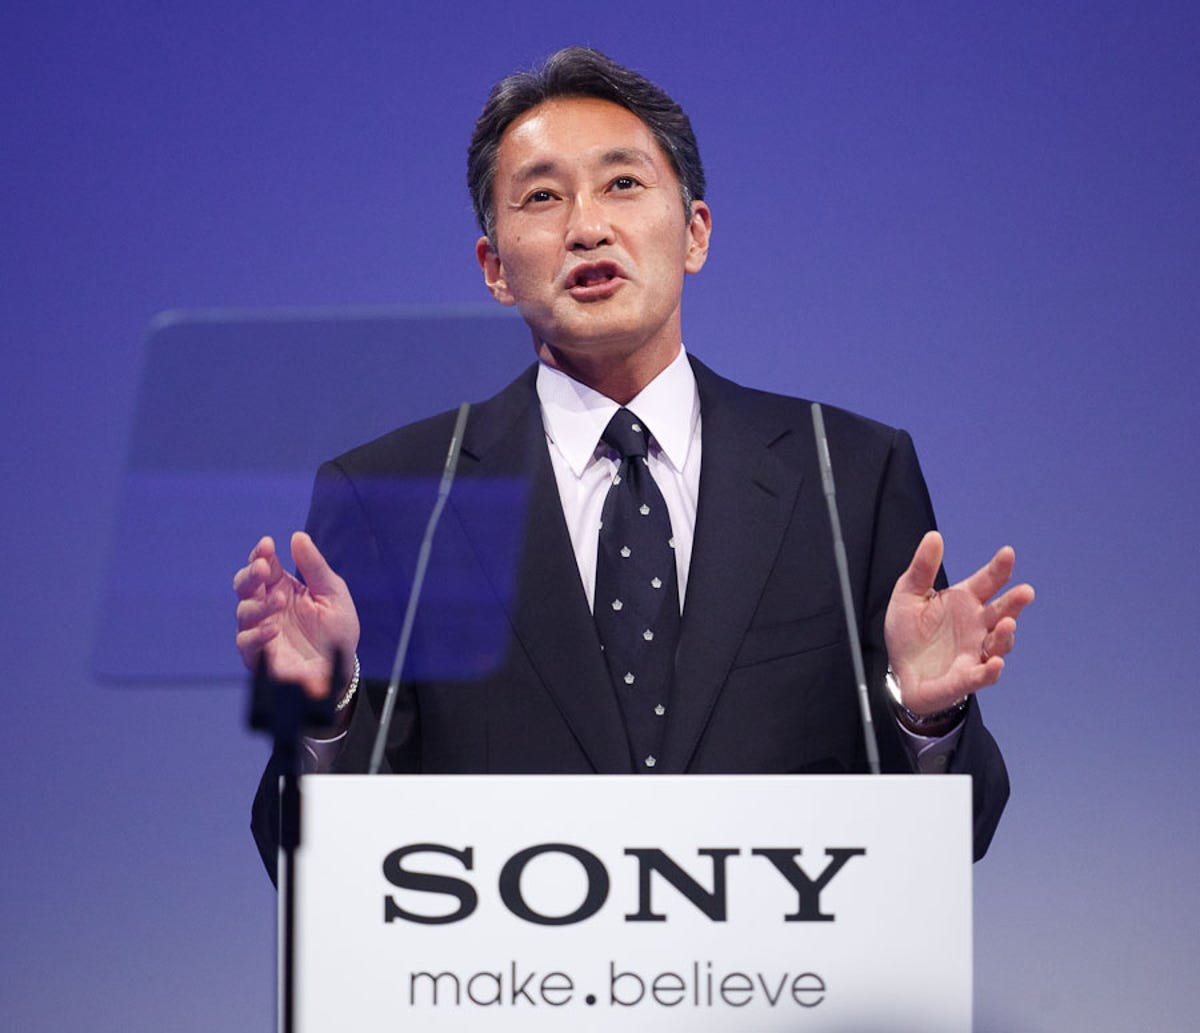 Kazuo Hirai, president of Sony's consumer products and services group, unveils the Sony Entertainment Network at IFA in Berlin.